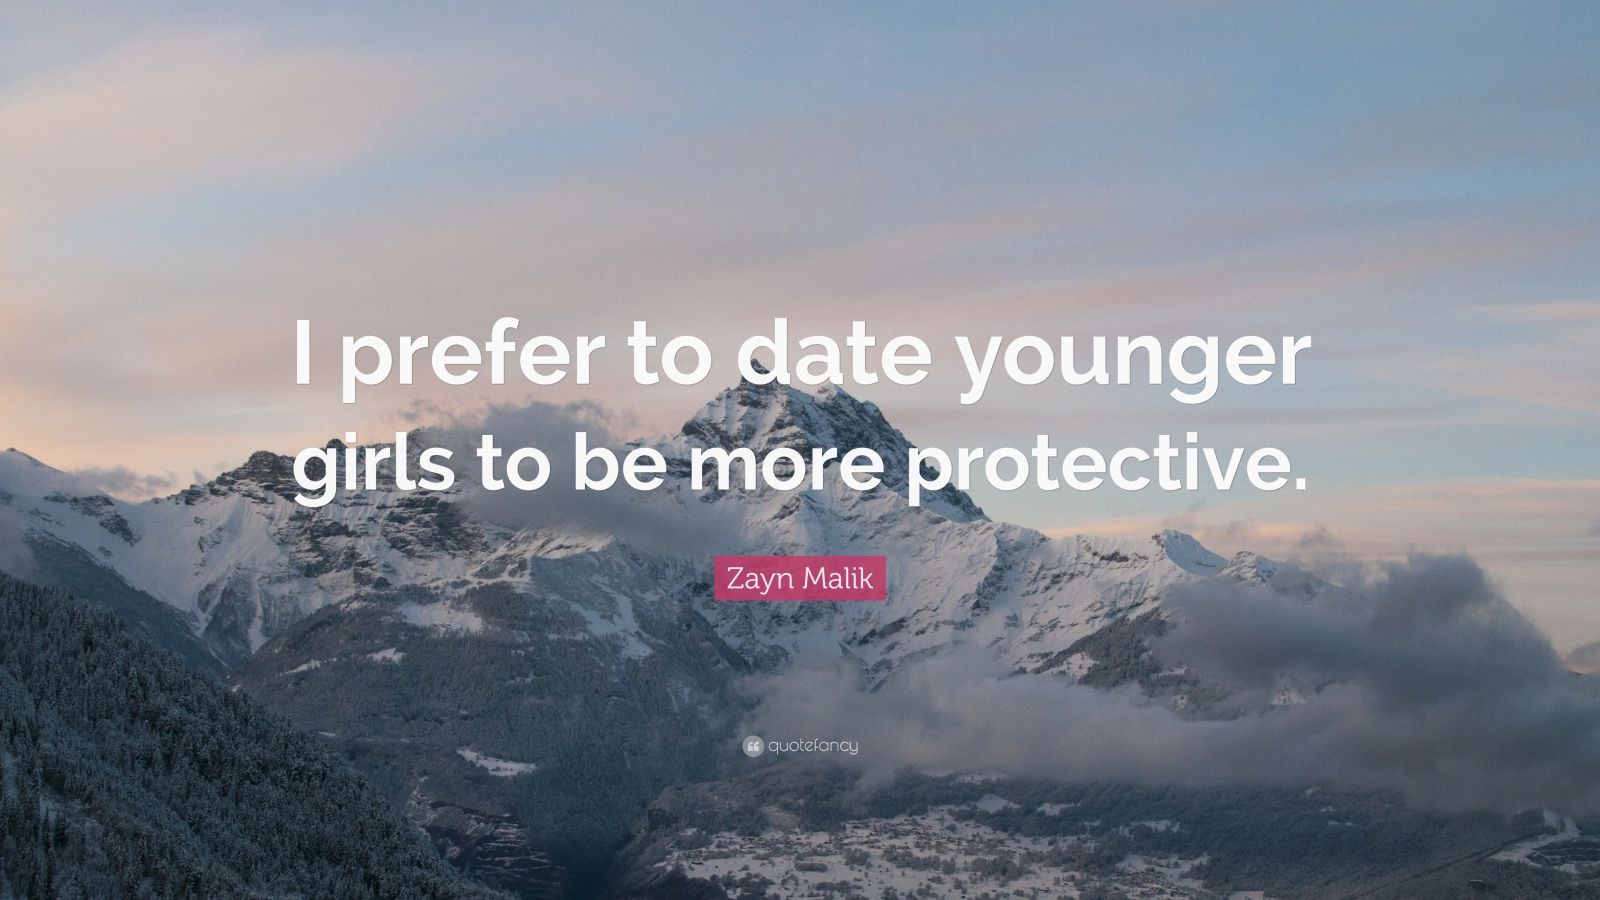 is it ok to date younger girl